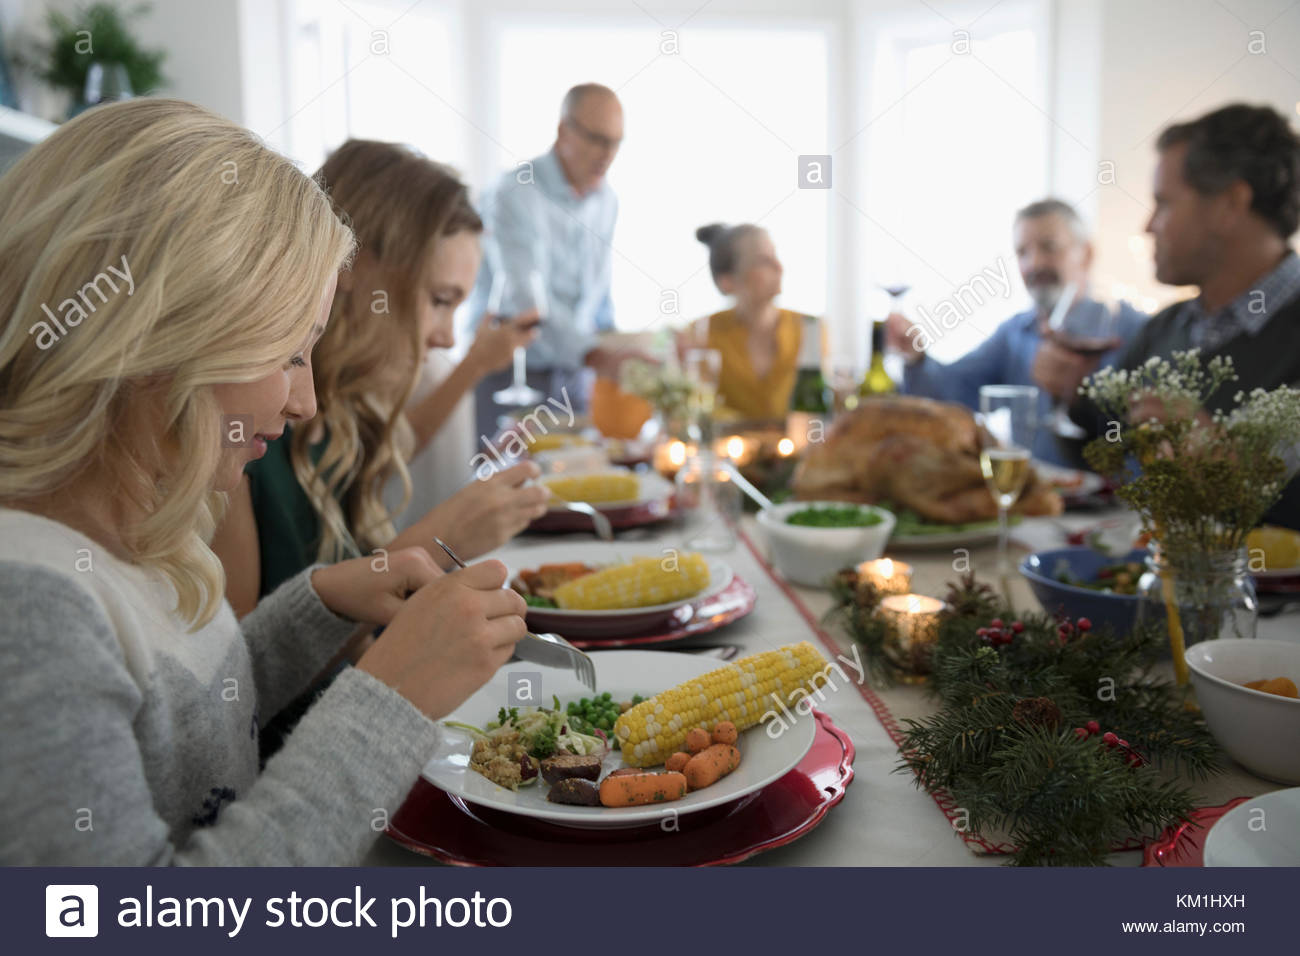 Family and friends enjoying Christmas dinner at table Stock Photo